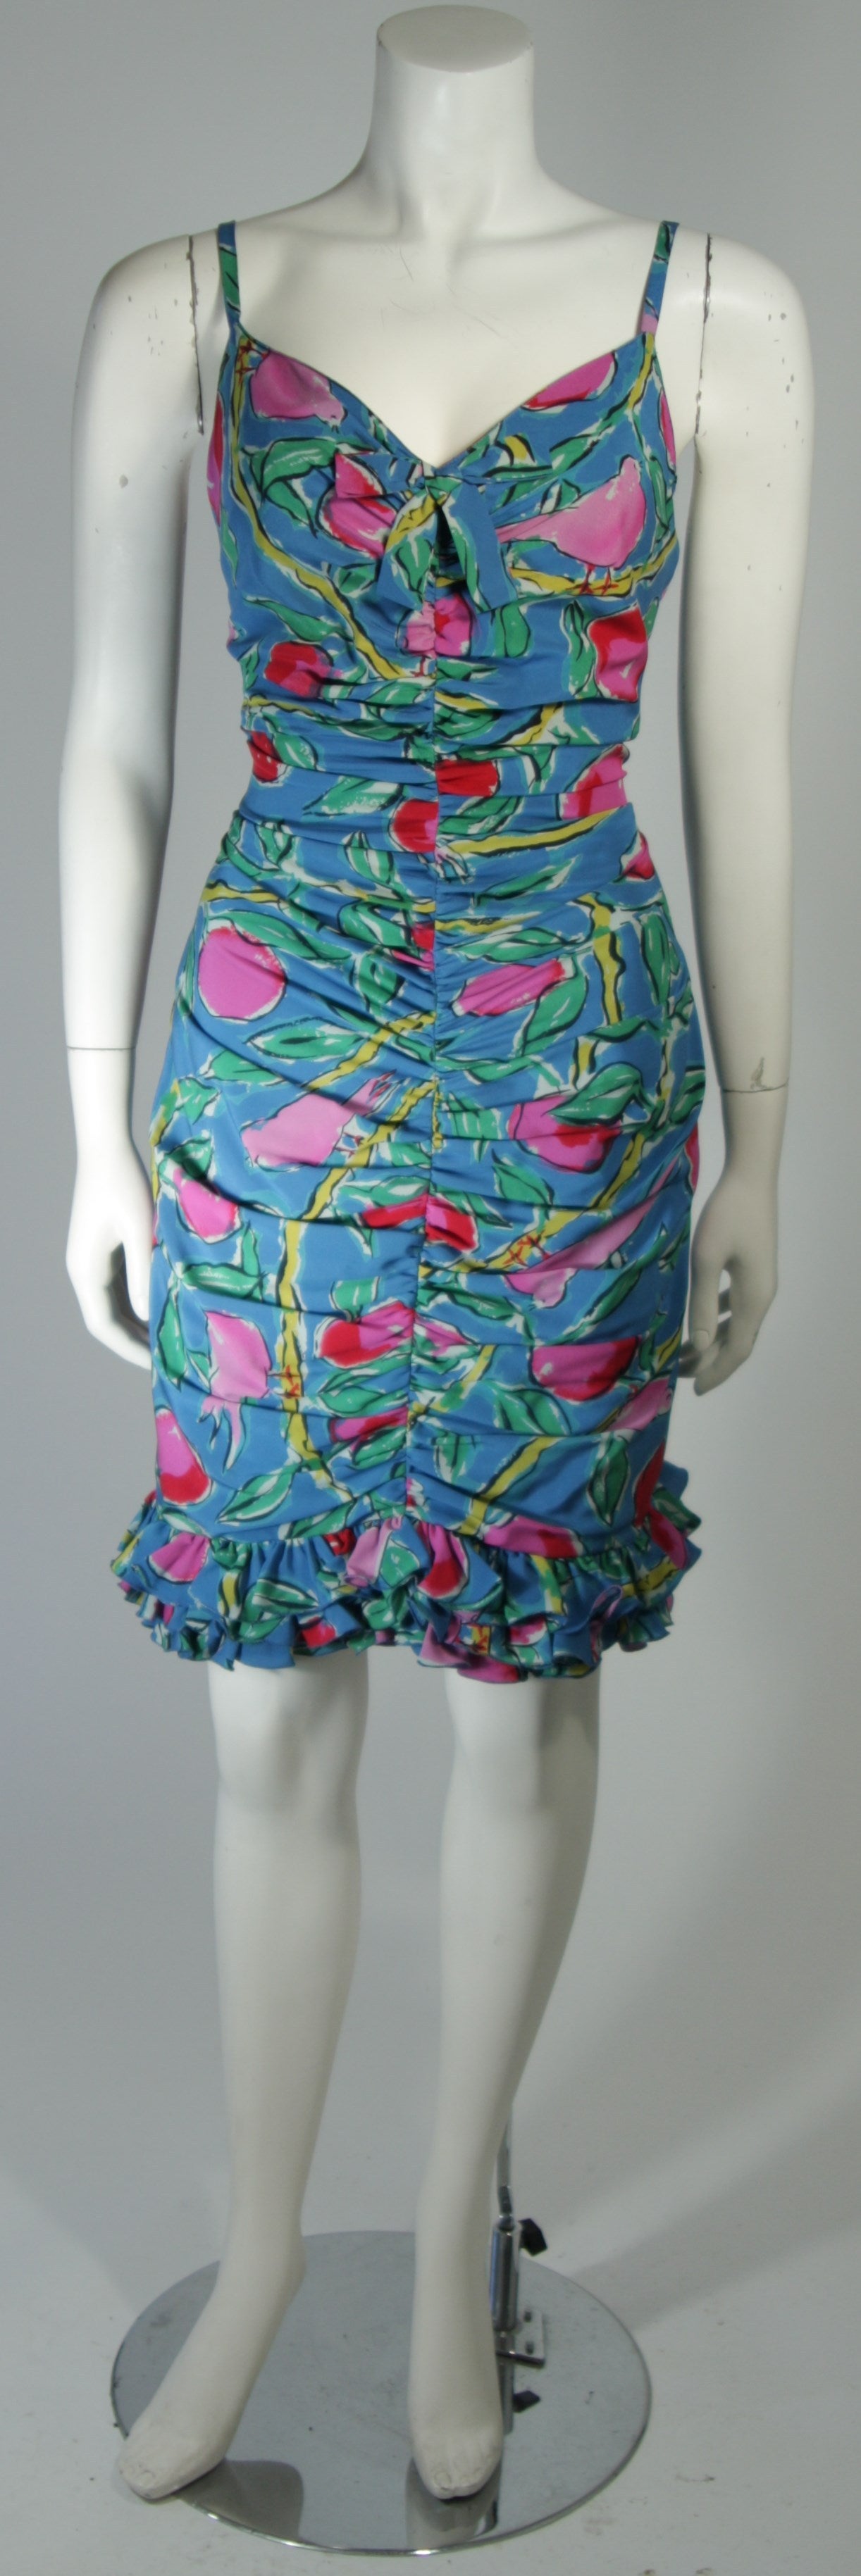 This Ungaro design is available for viewing at our Beverly Hills Boutique. We offer a large selection of evening gowns and luxury garments.

This cocktail dress is composed of a tropical print silk with a bird motif. There are spaghetti straps and